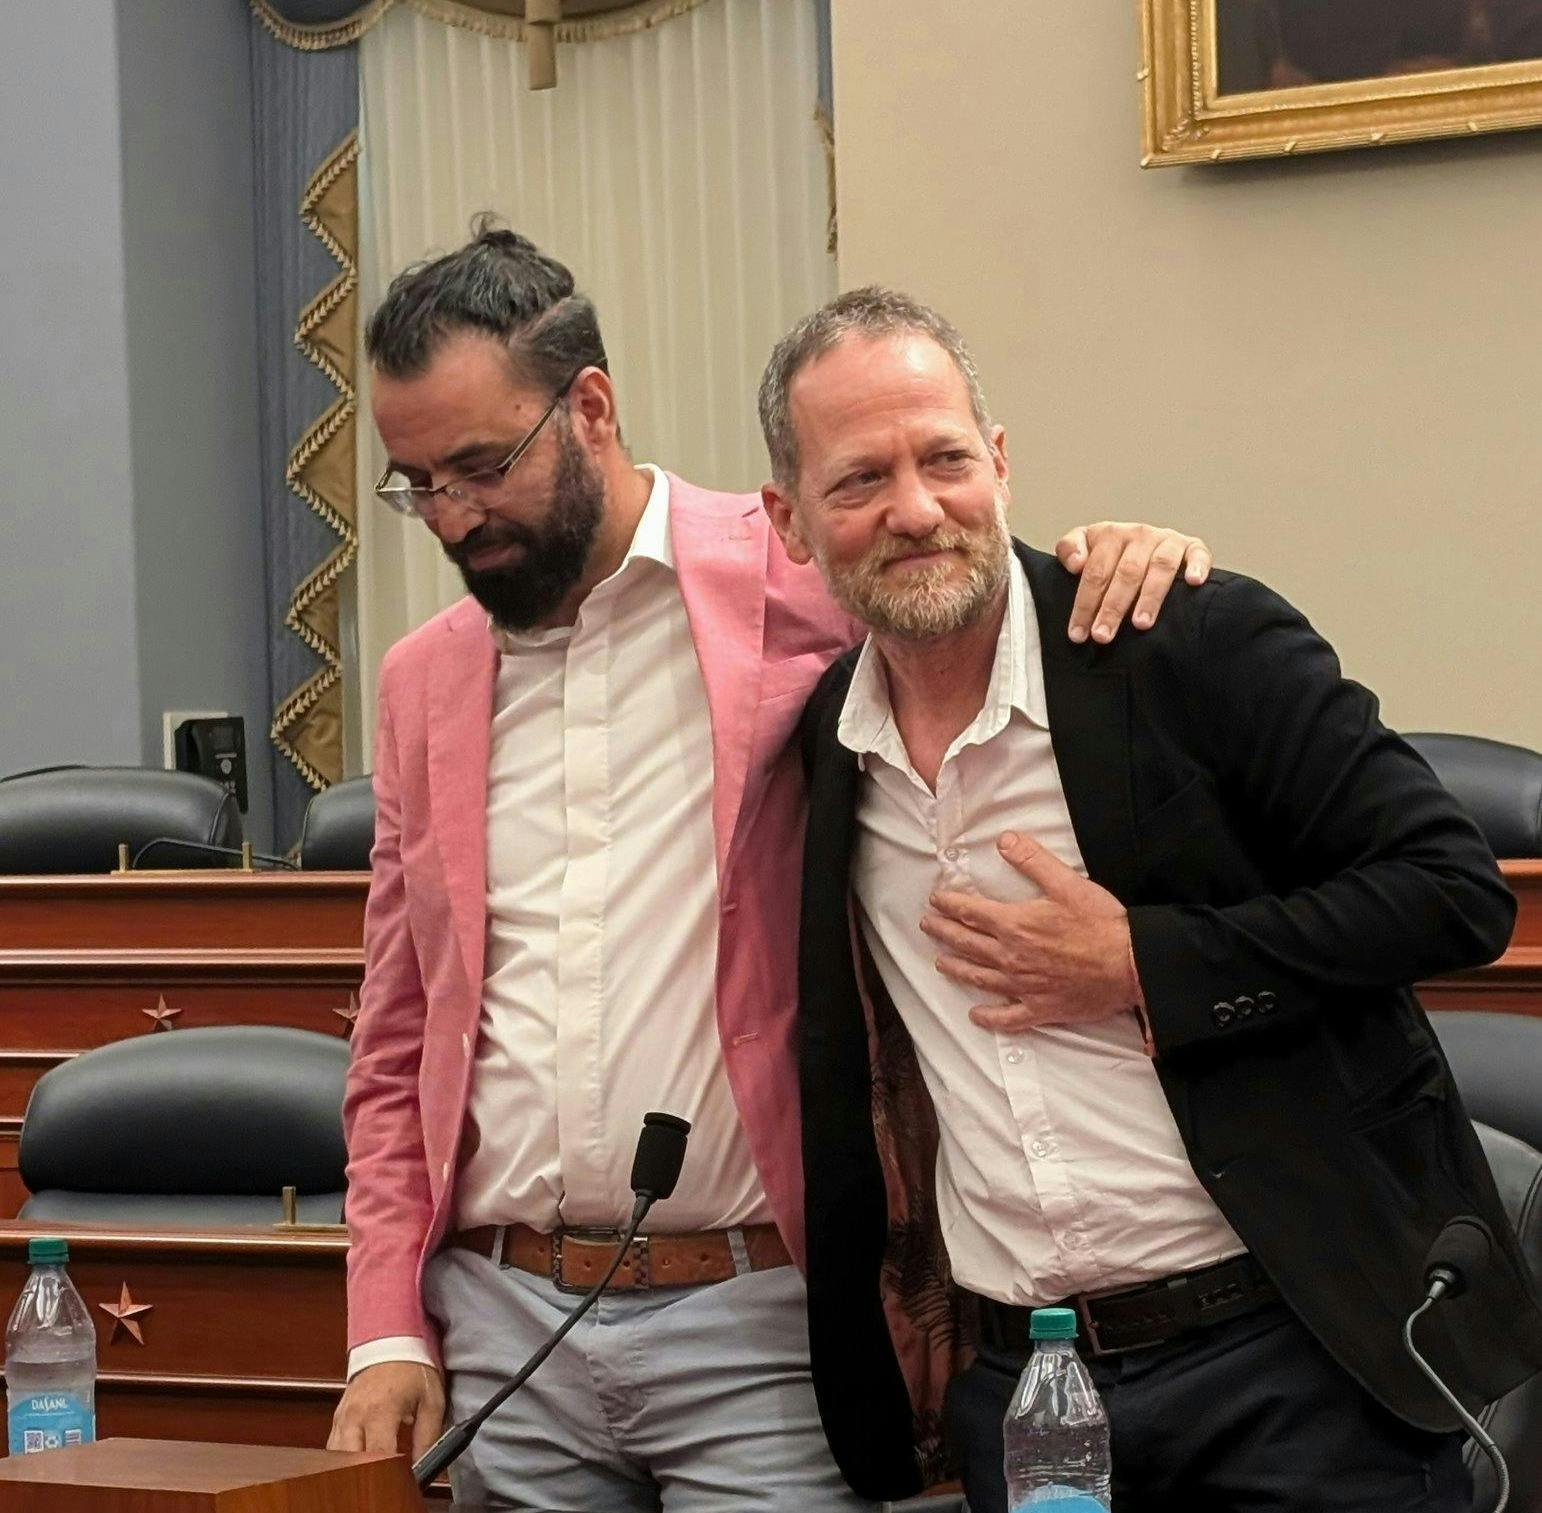 Maoz Inon and Aziz Abu Sarah stand in a congressional meeting room with their arms around each other